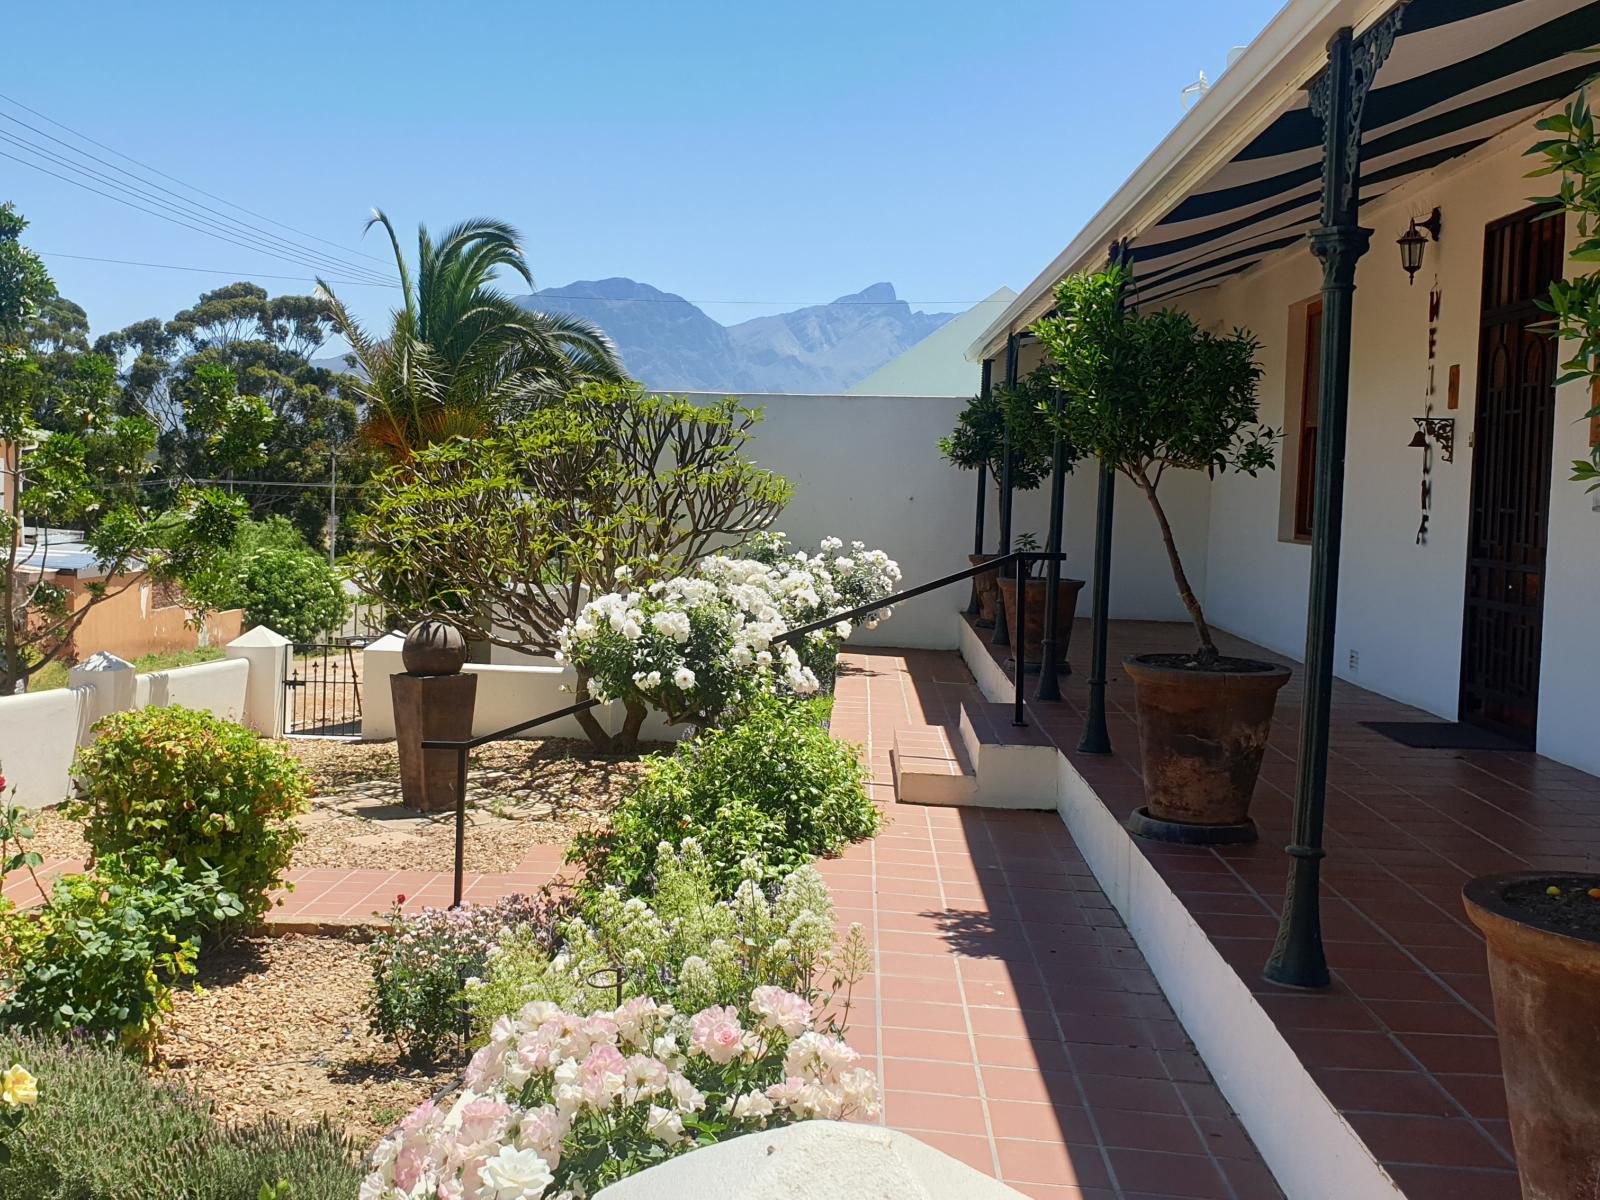 Big Sky Villa Tulbagh Western Cape South Africa Complementary Colors, House, Building, Architecture, Plant, Nature, Garden